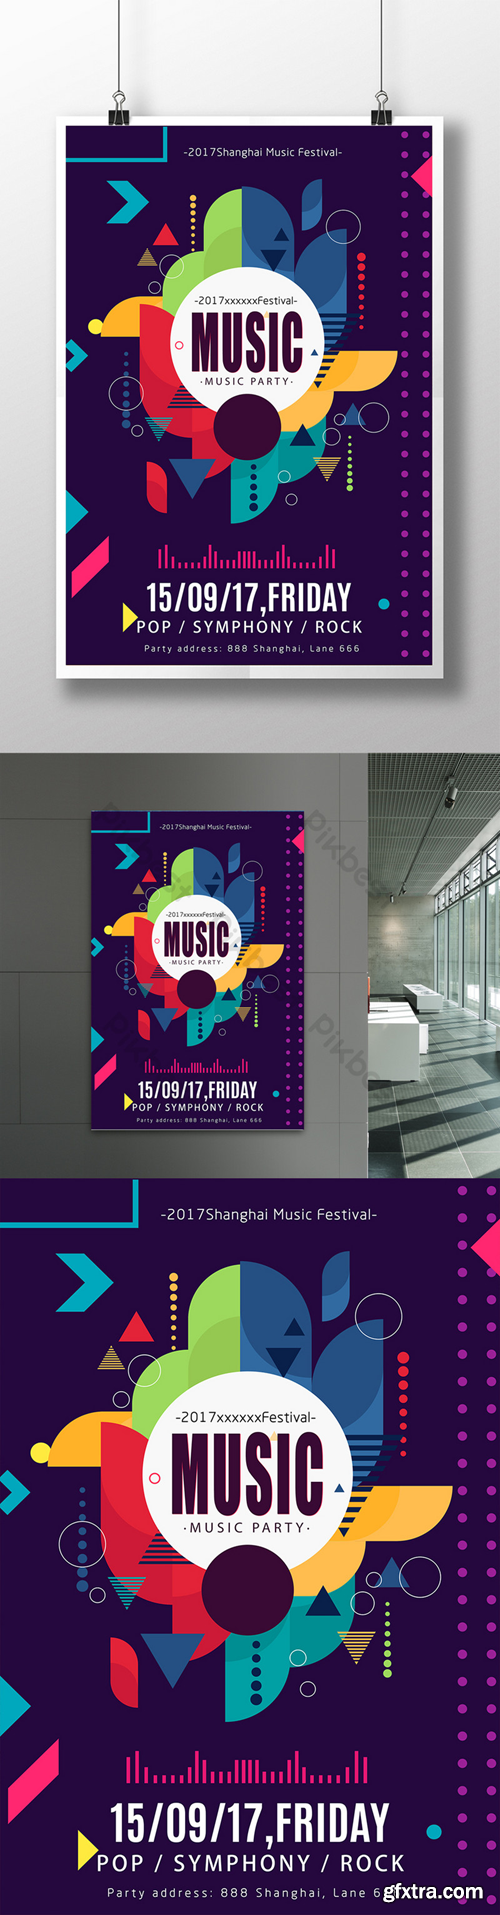 Cool music festival poster electric sound poster music poster Template PSD